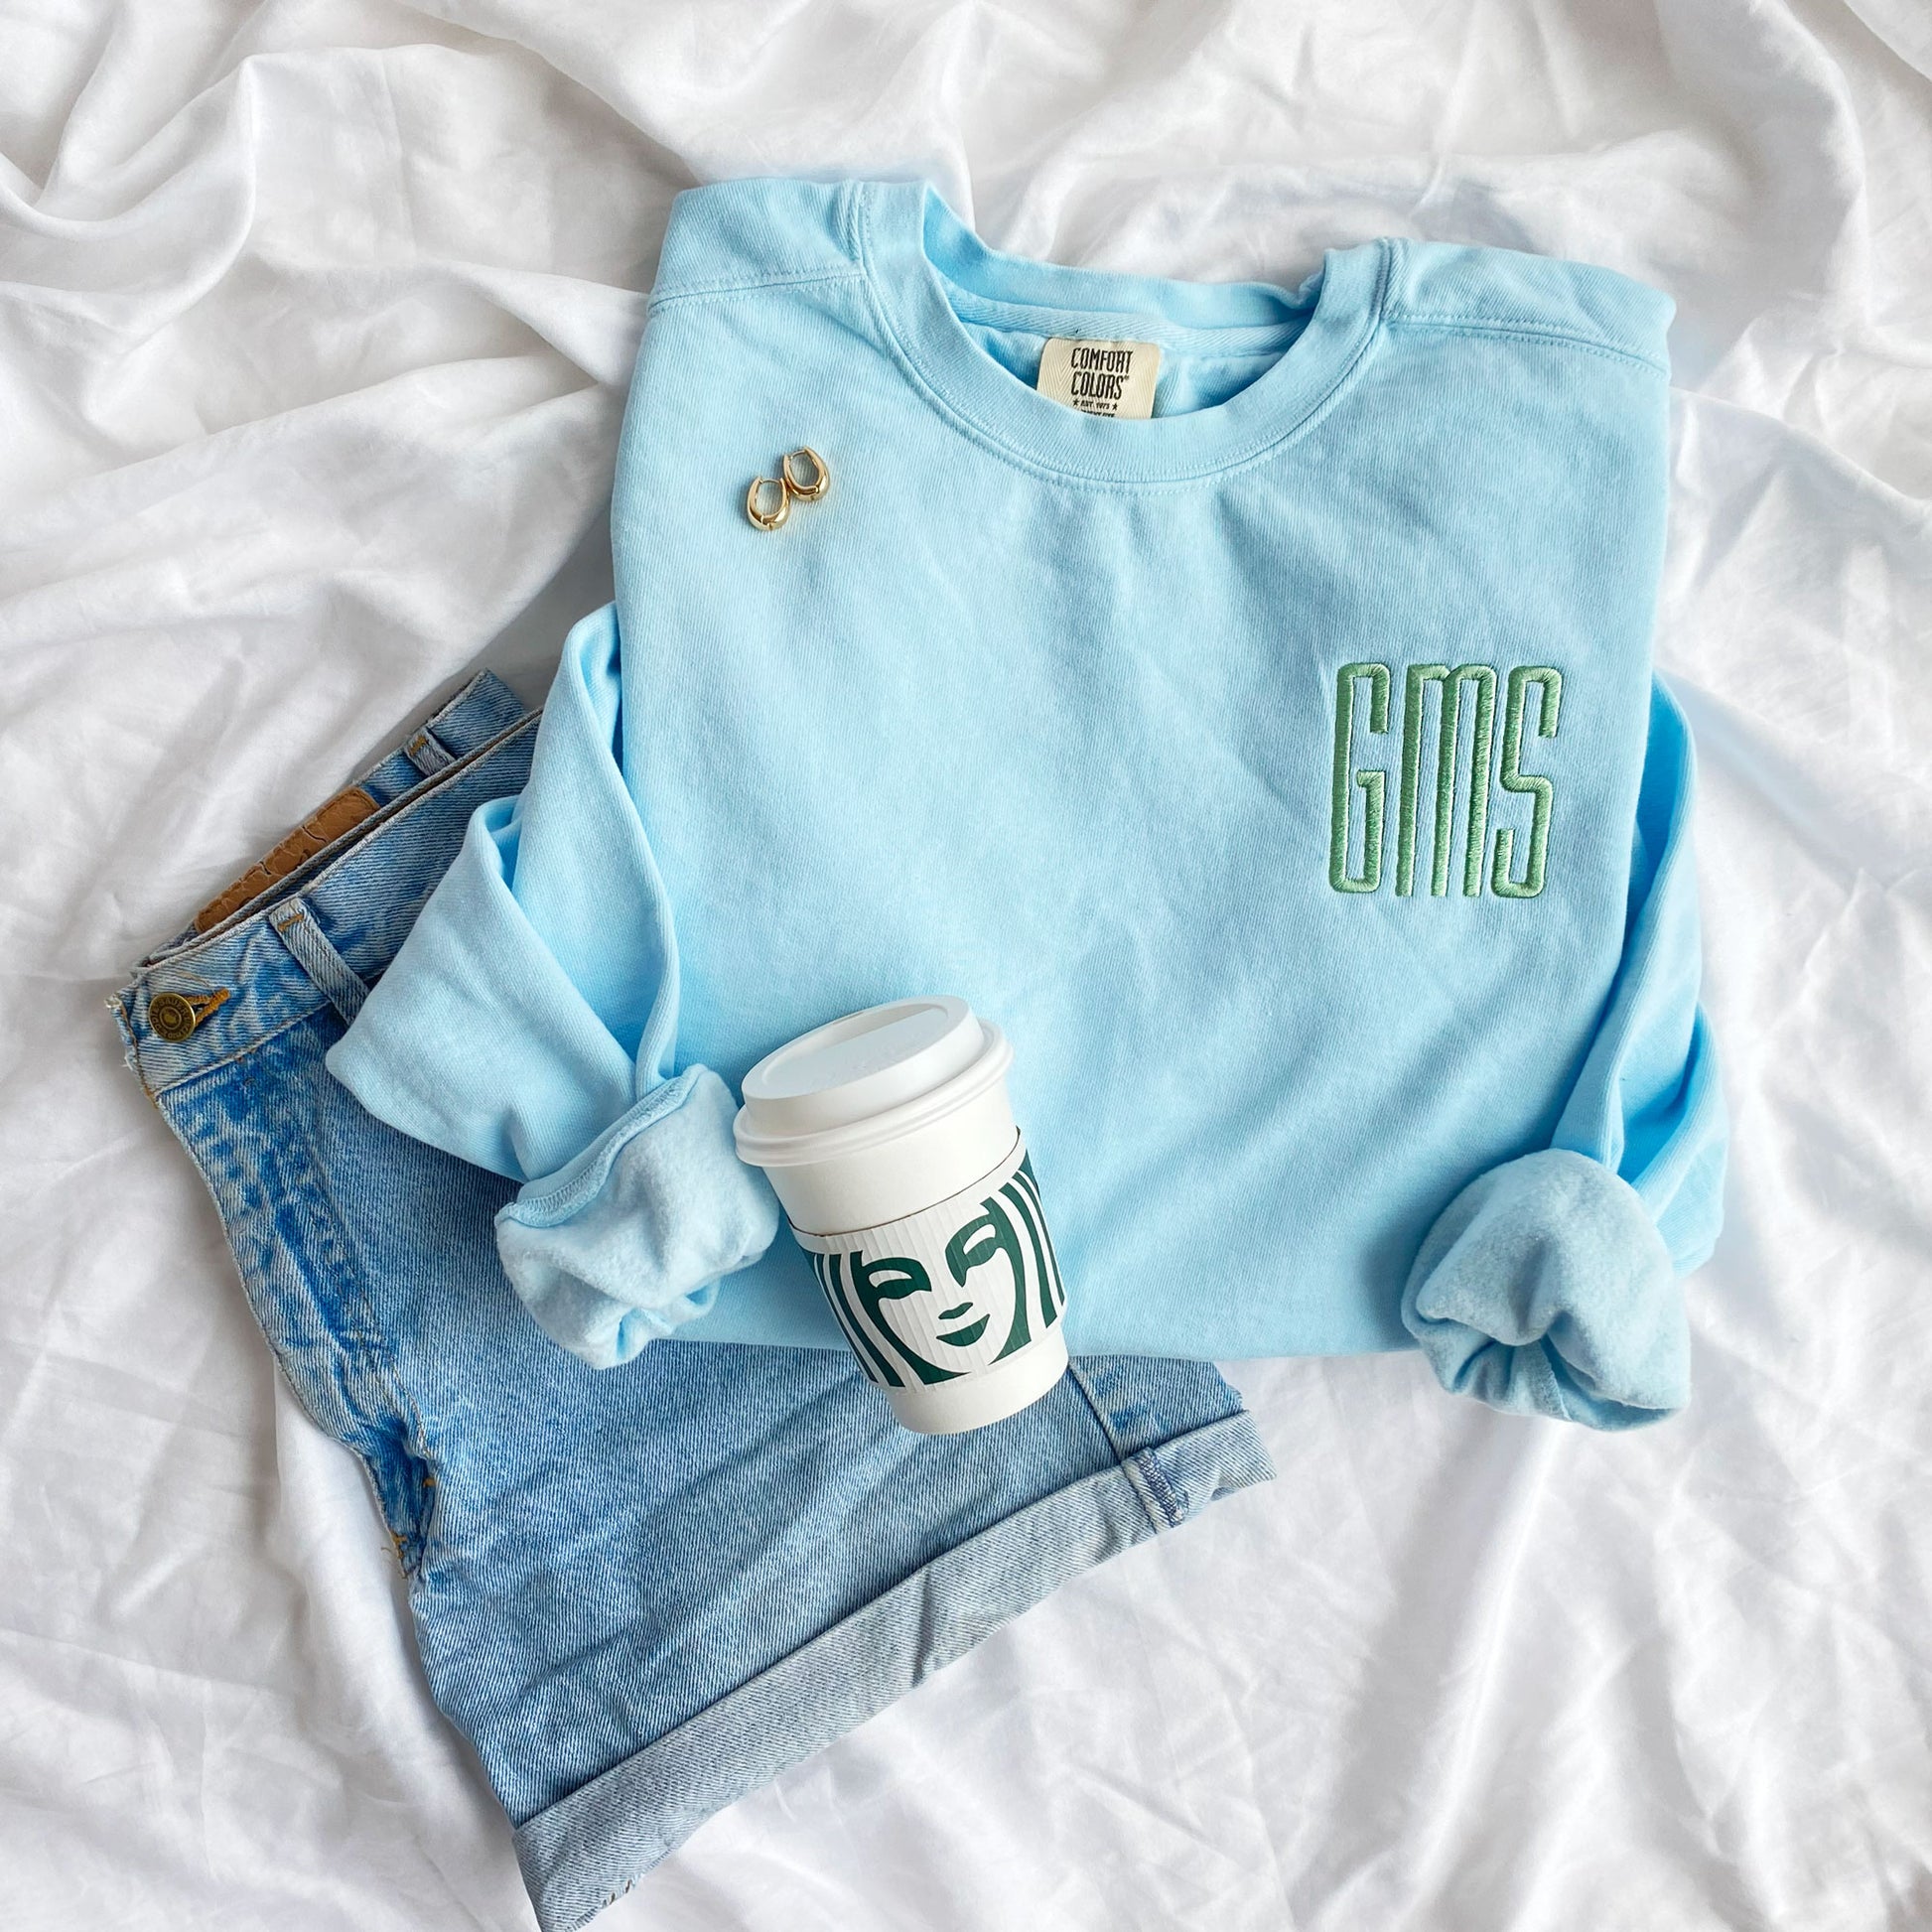 Chambray comfort colors crewneck sweatshirt with GMS embroidered monogram in silver sage thread styled with jean shorts, jewelry, and a Starbucks cup